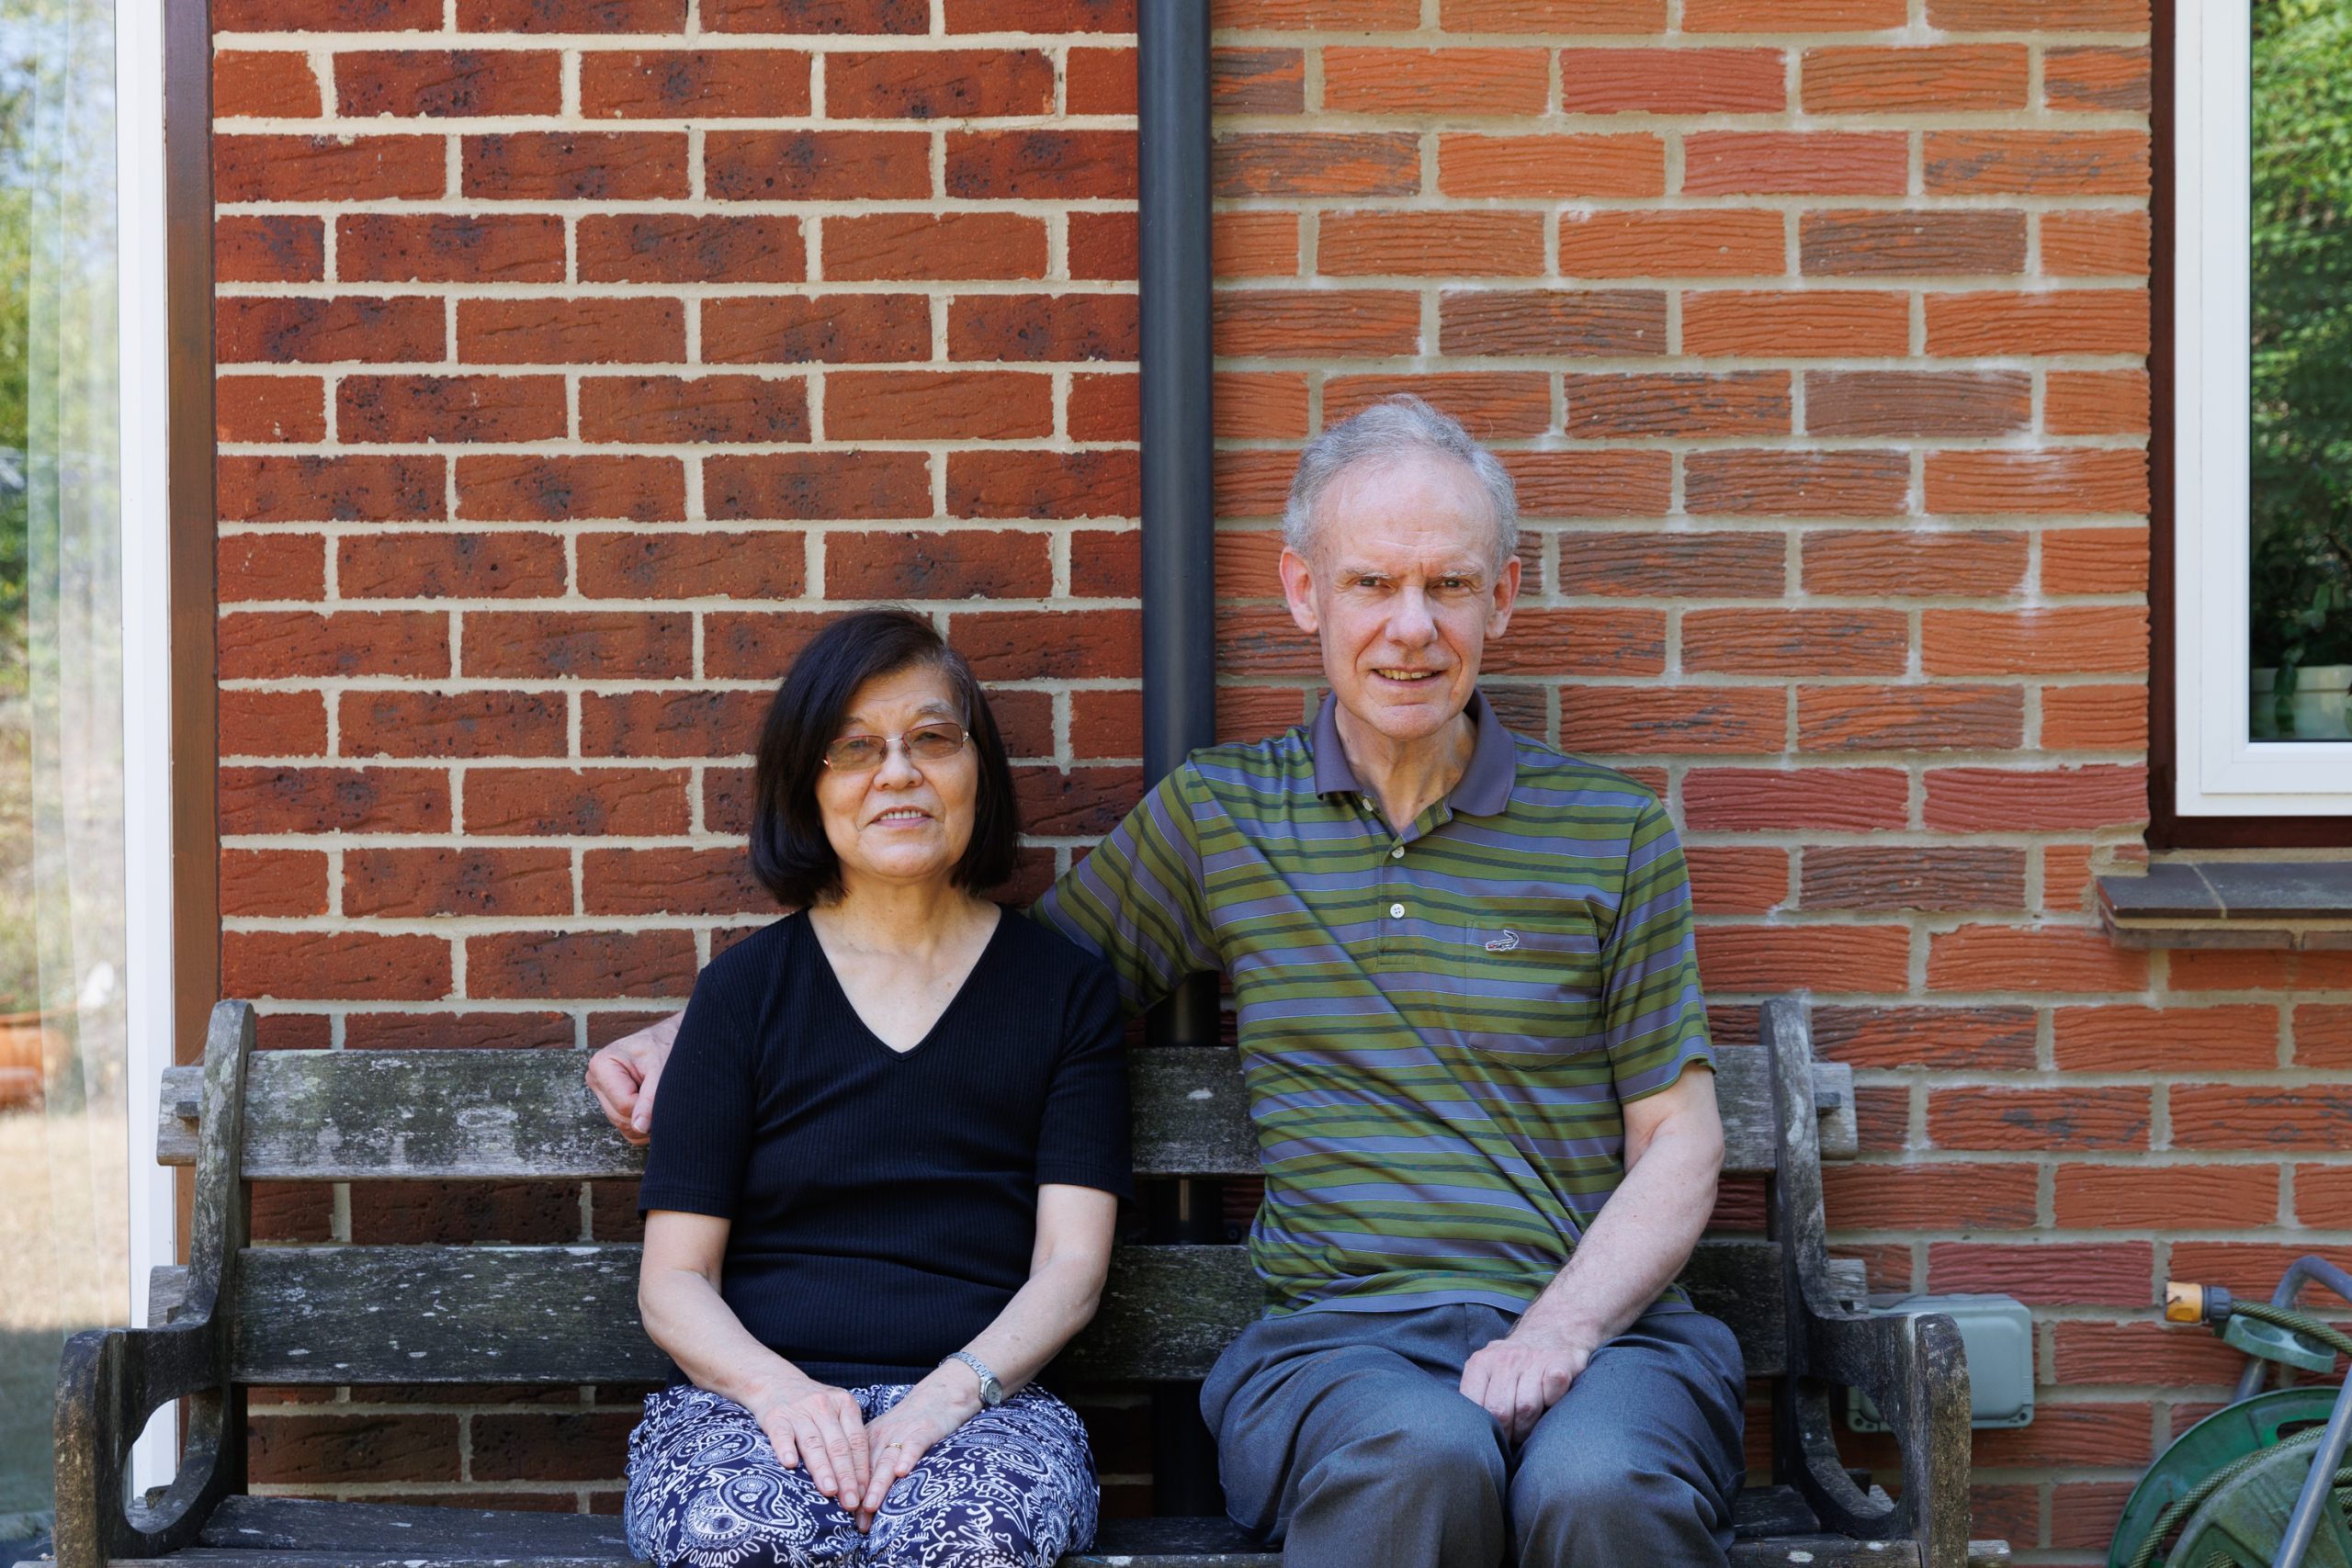 Peter Tuson and his wife, Mei, sat on a bench outside.